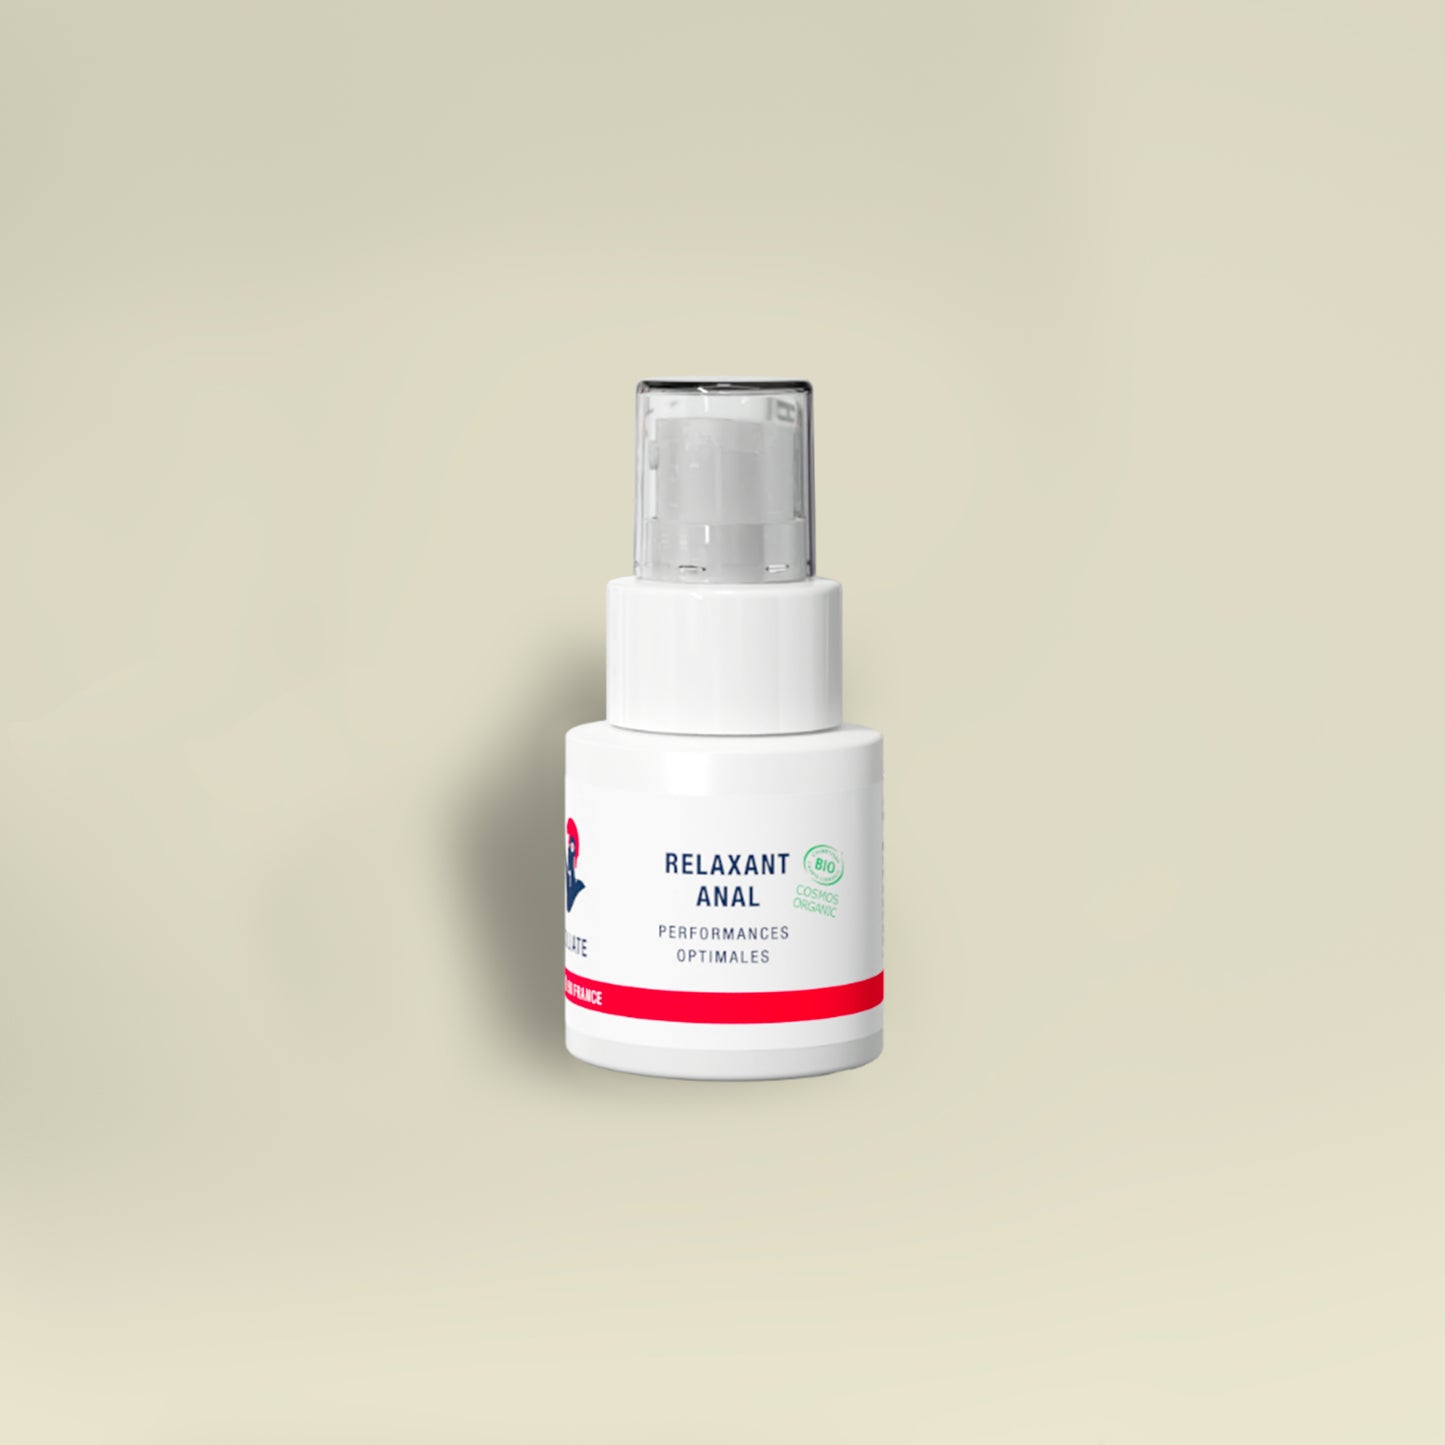 Relaxant anal - 30ml